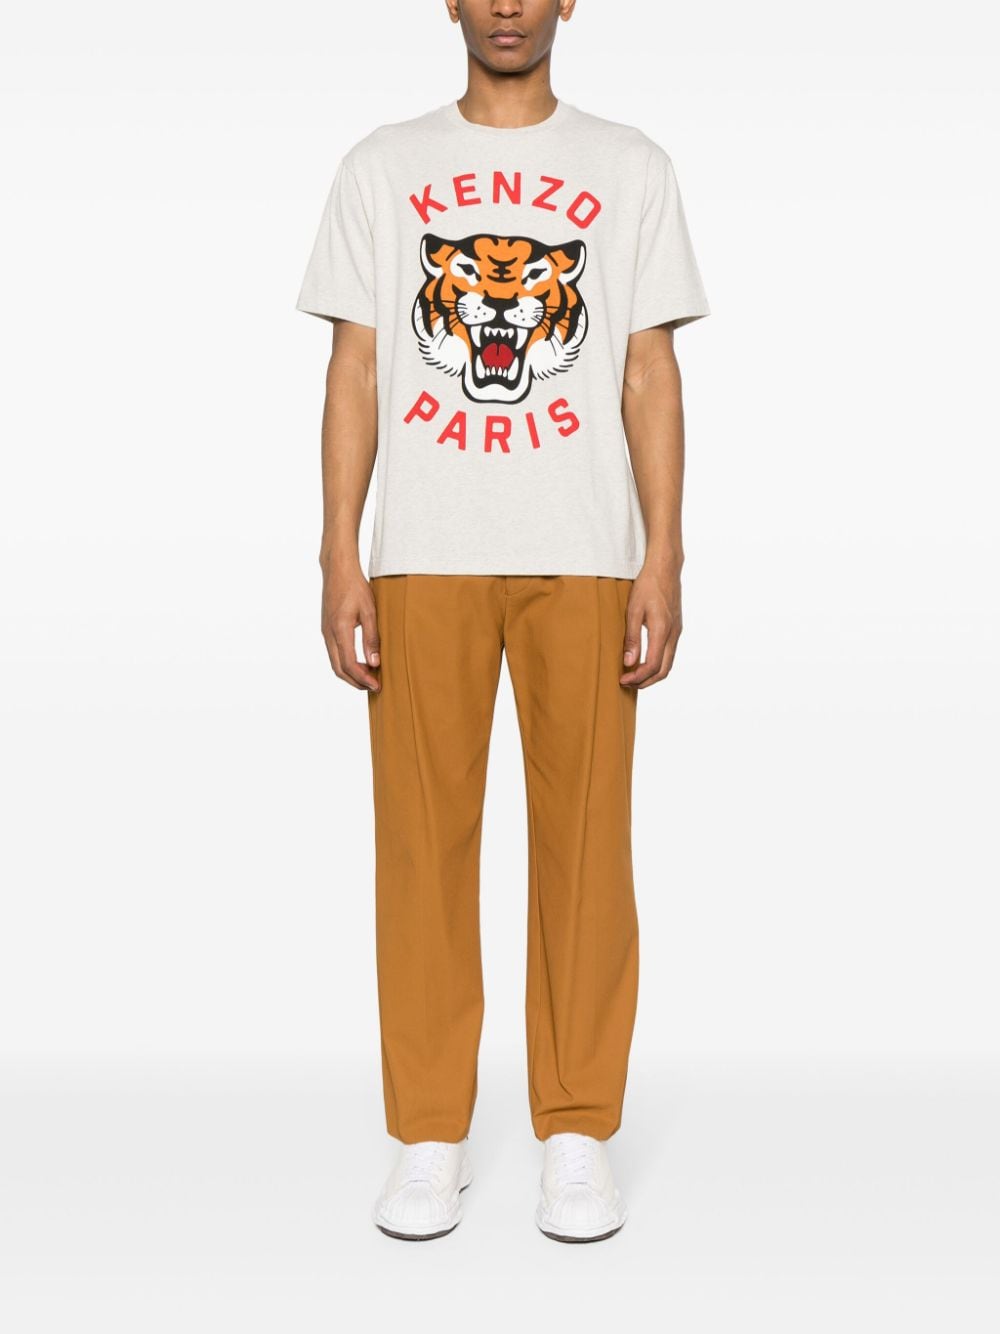 Lucky Tiger cotton T-shirt<BR/><BR/><BR/>